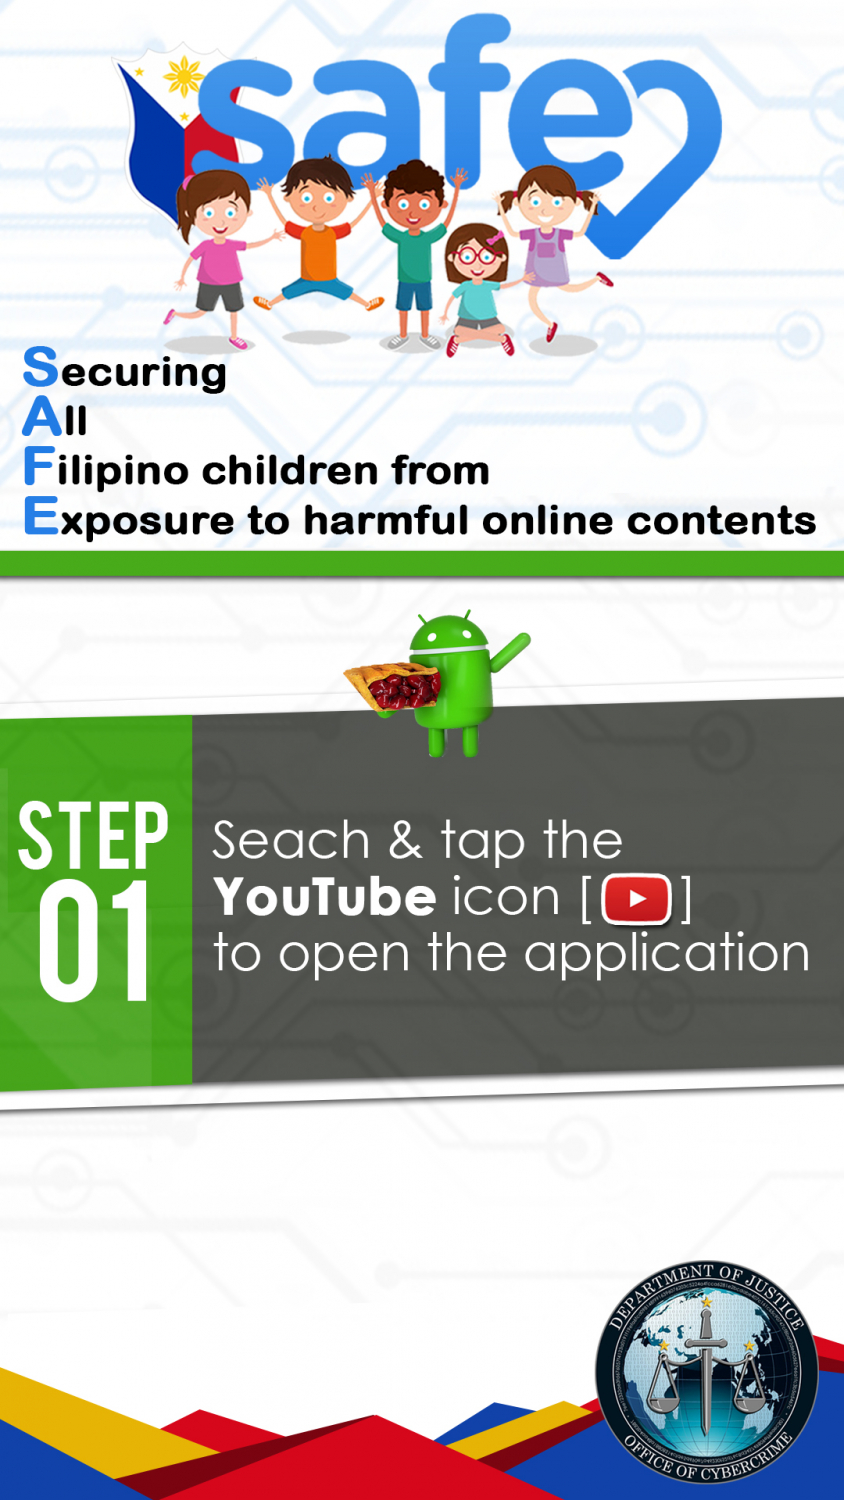 Turn on SAFEty Features of Youtube App on Android Device - Step 1